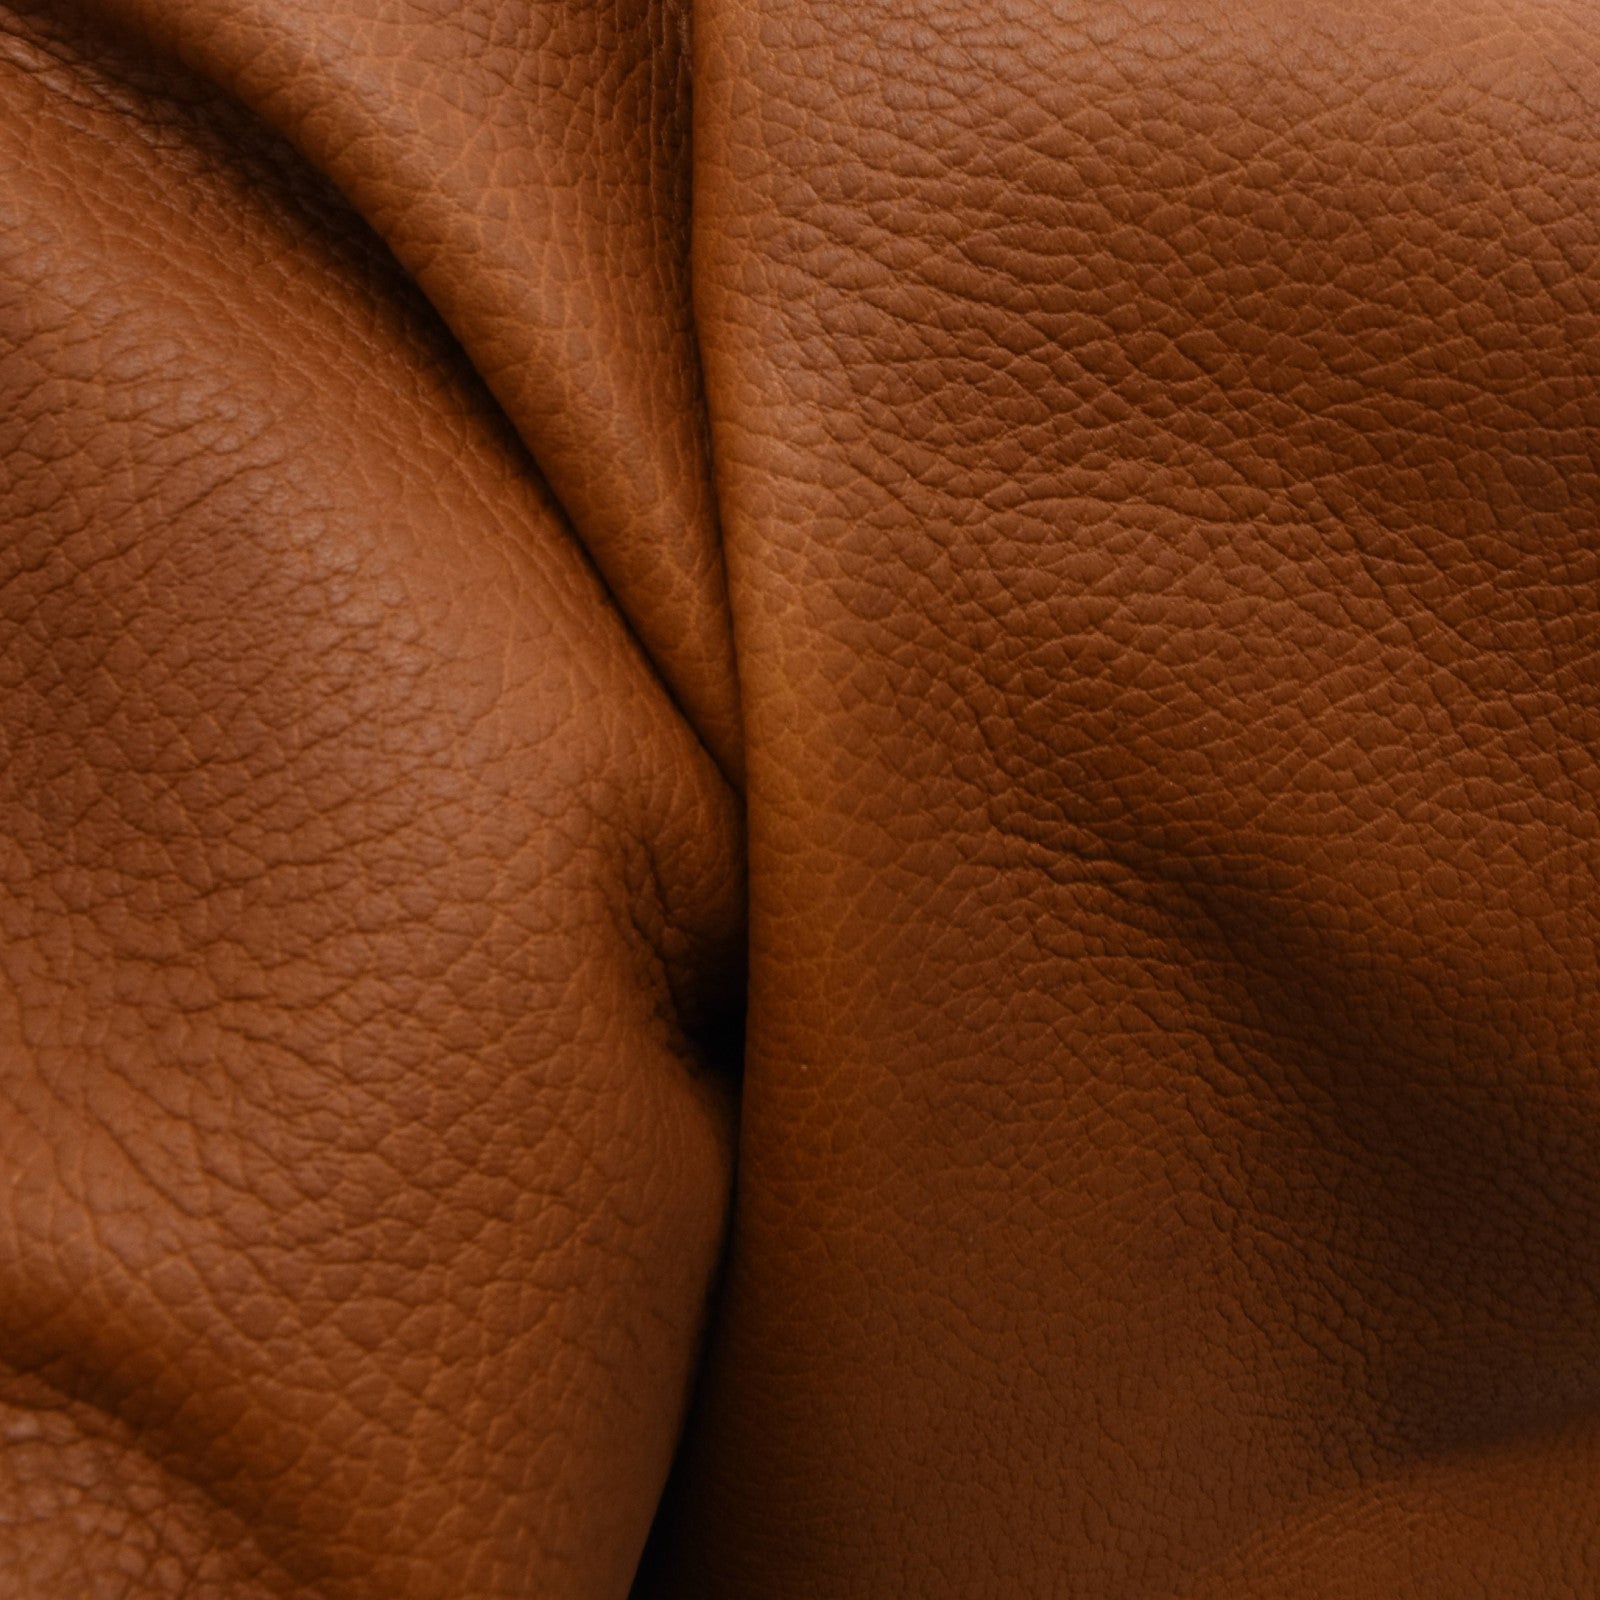 Oil Tan 500 Sq Ft Wholesale Cowhide Sides, Base Camp Burnt Orange / 500 Sq Ft | The Leather Guy